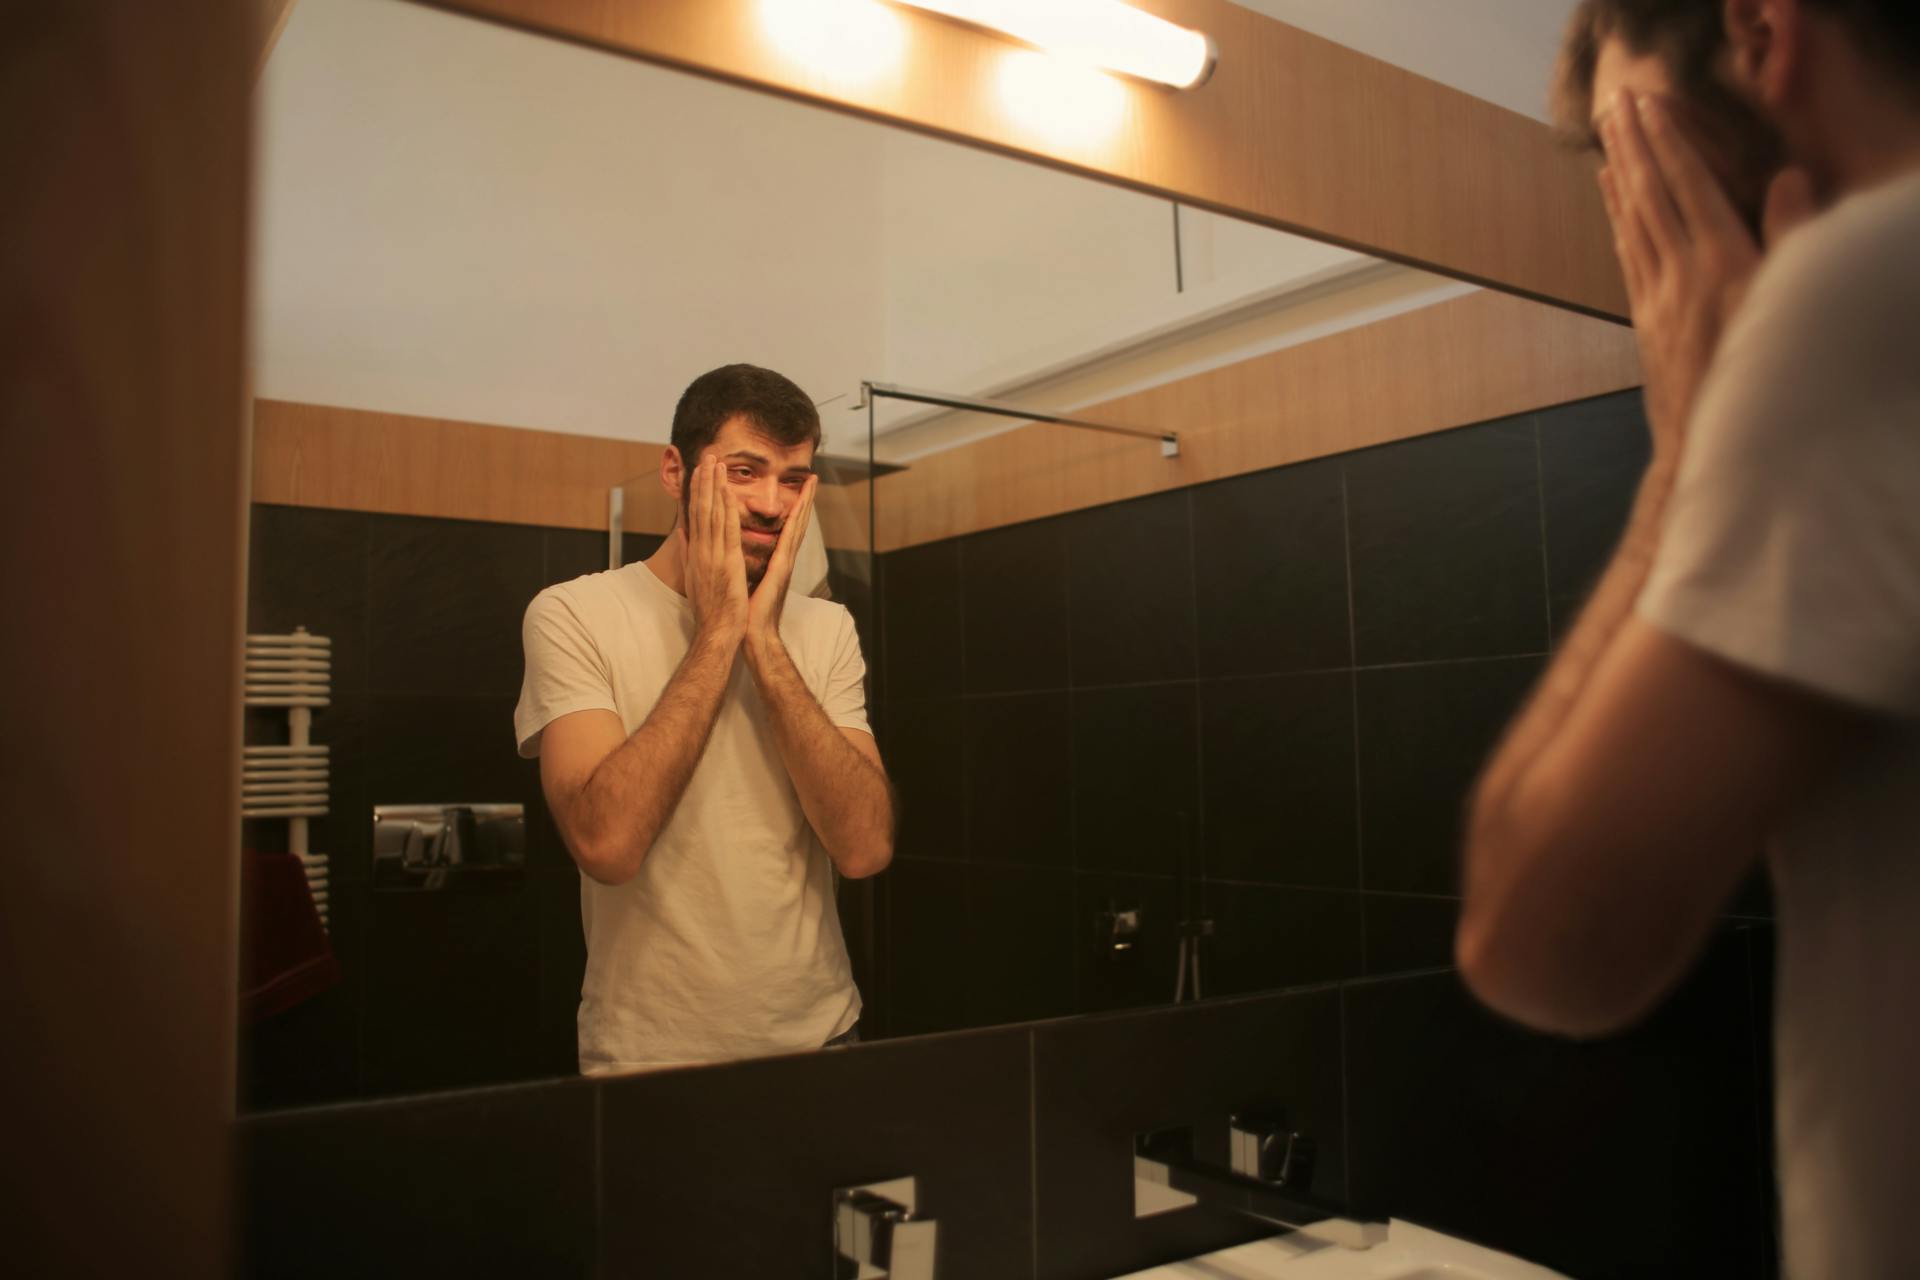 A tired man looking in the mirror in a bathroom | Source: Pexels